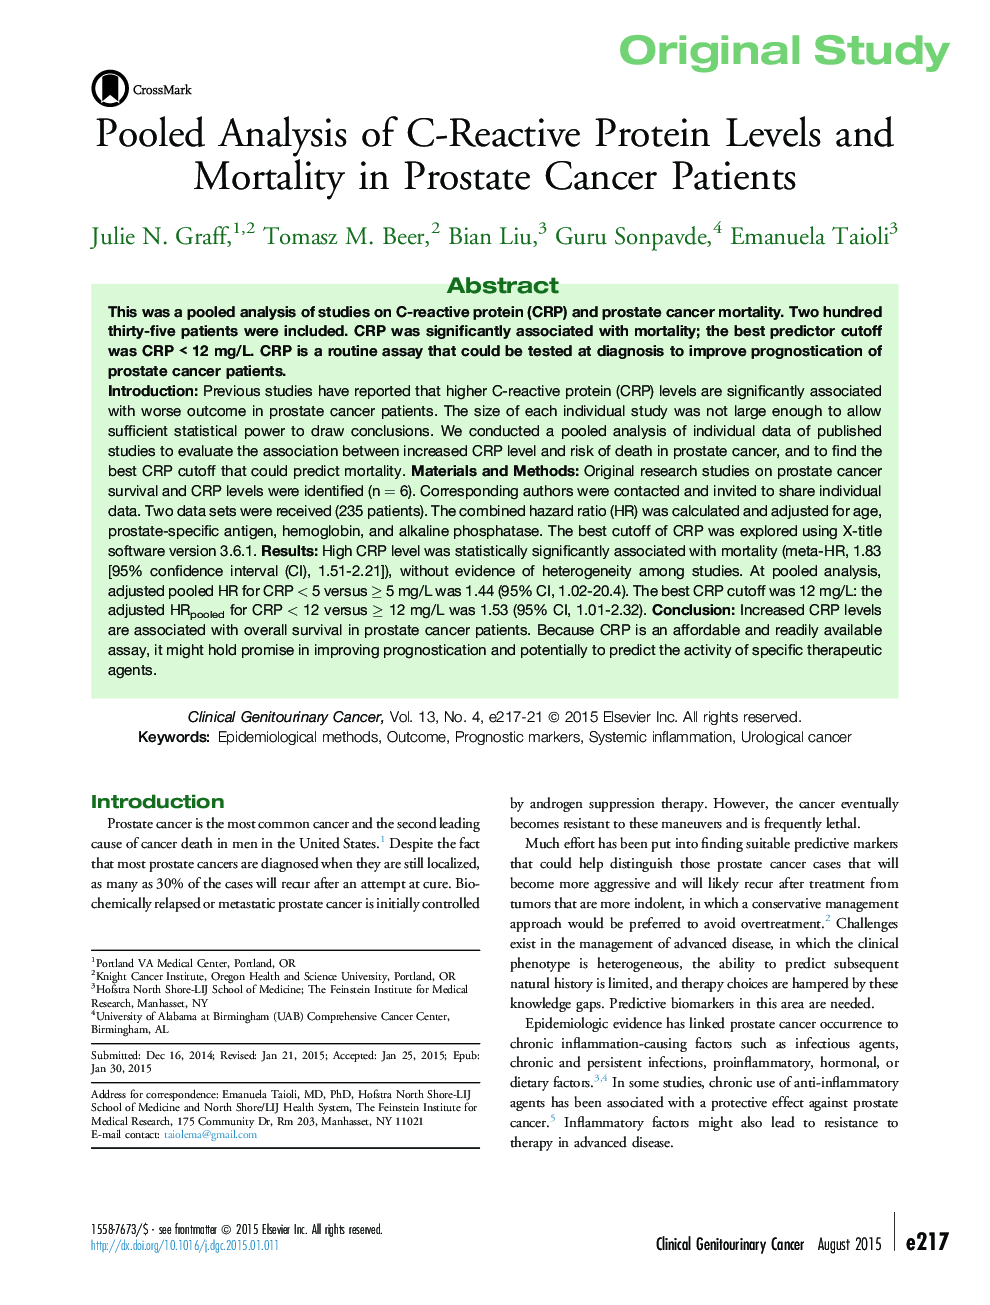 Original StudyPooled Analysis of C-Reactive Protein Levels and Mortality in Prostate Cancer Patients